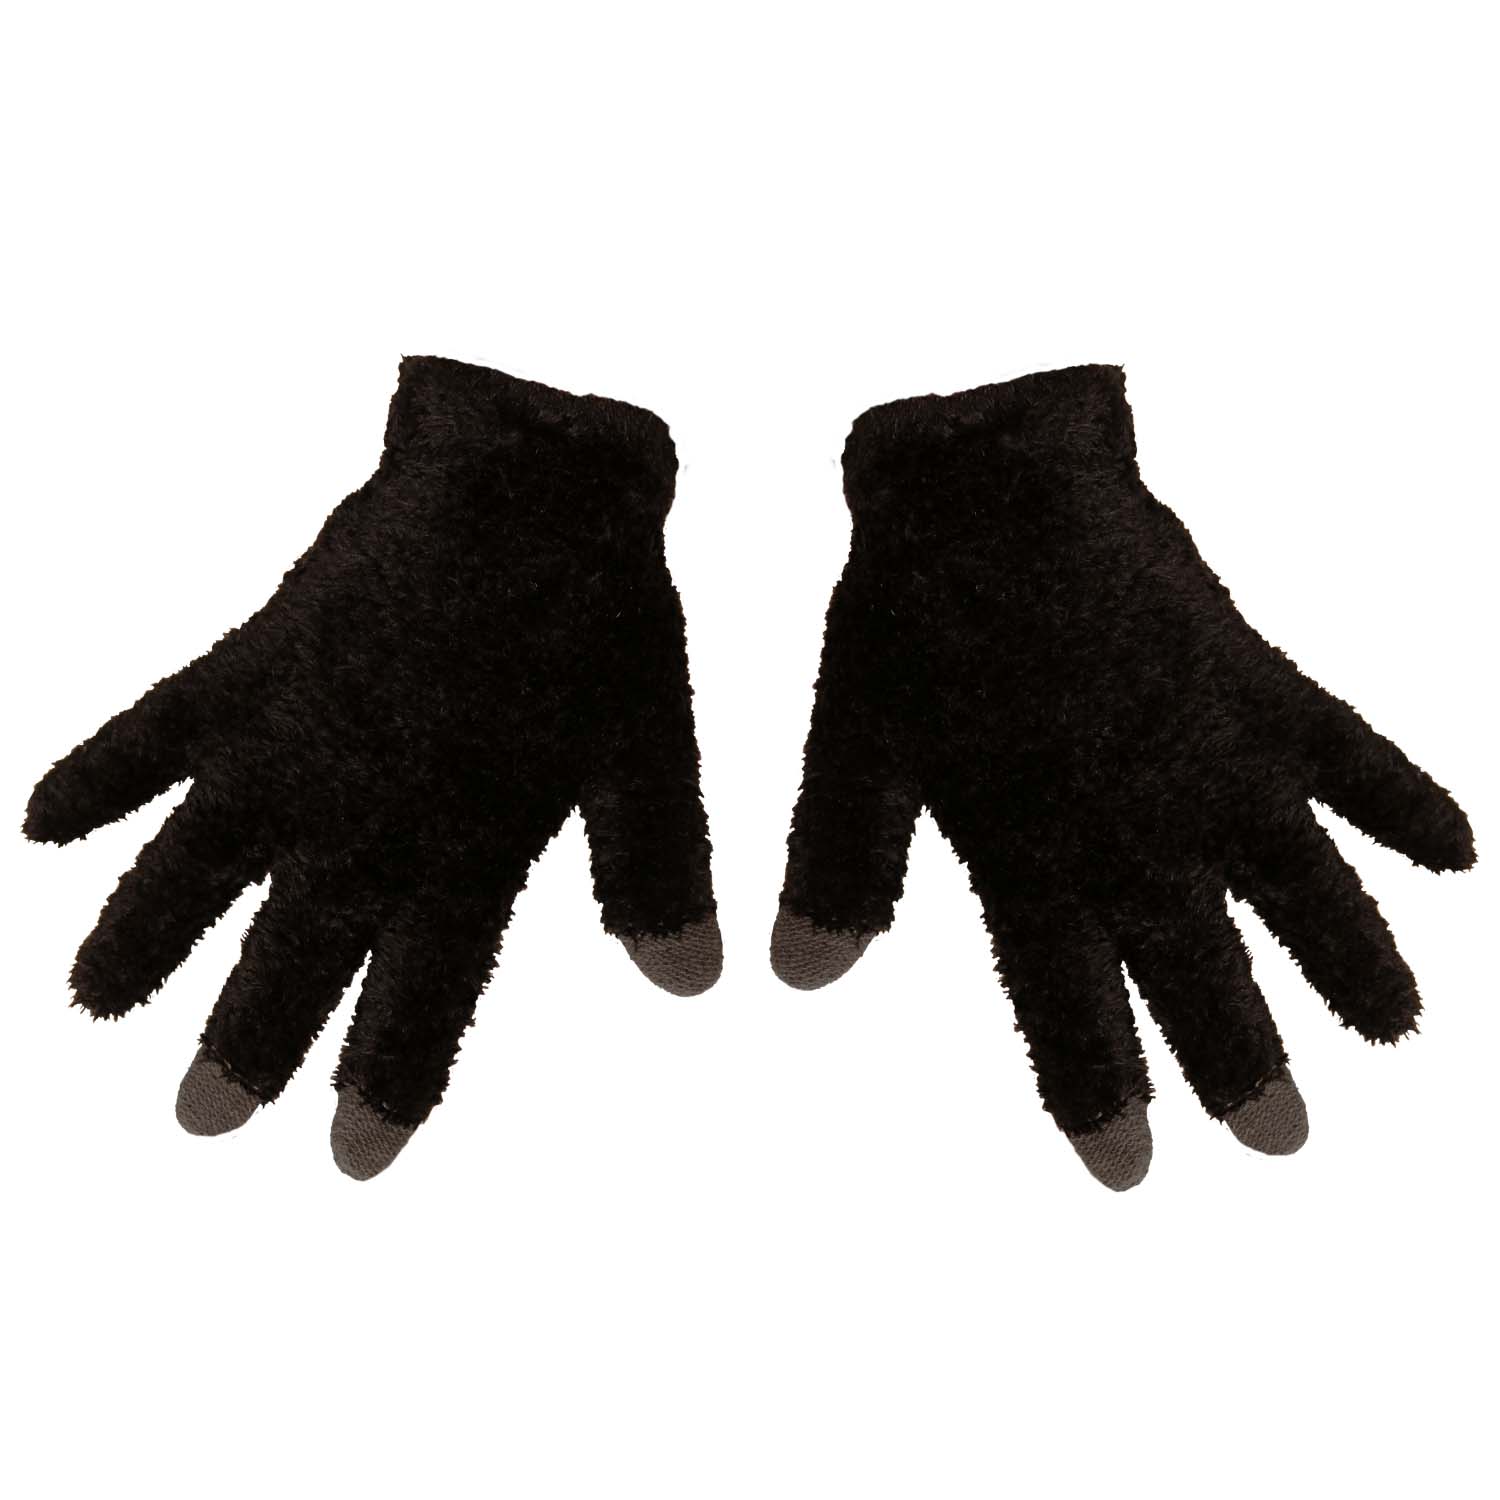 Unisex Wholesale Touch Gloves in 3 Assorted Colors - Bulk Case of 96 Pairs